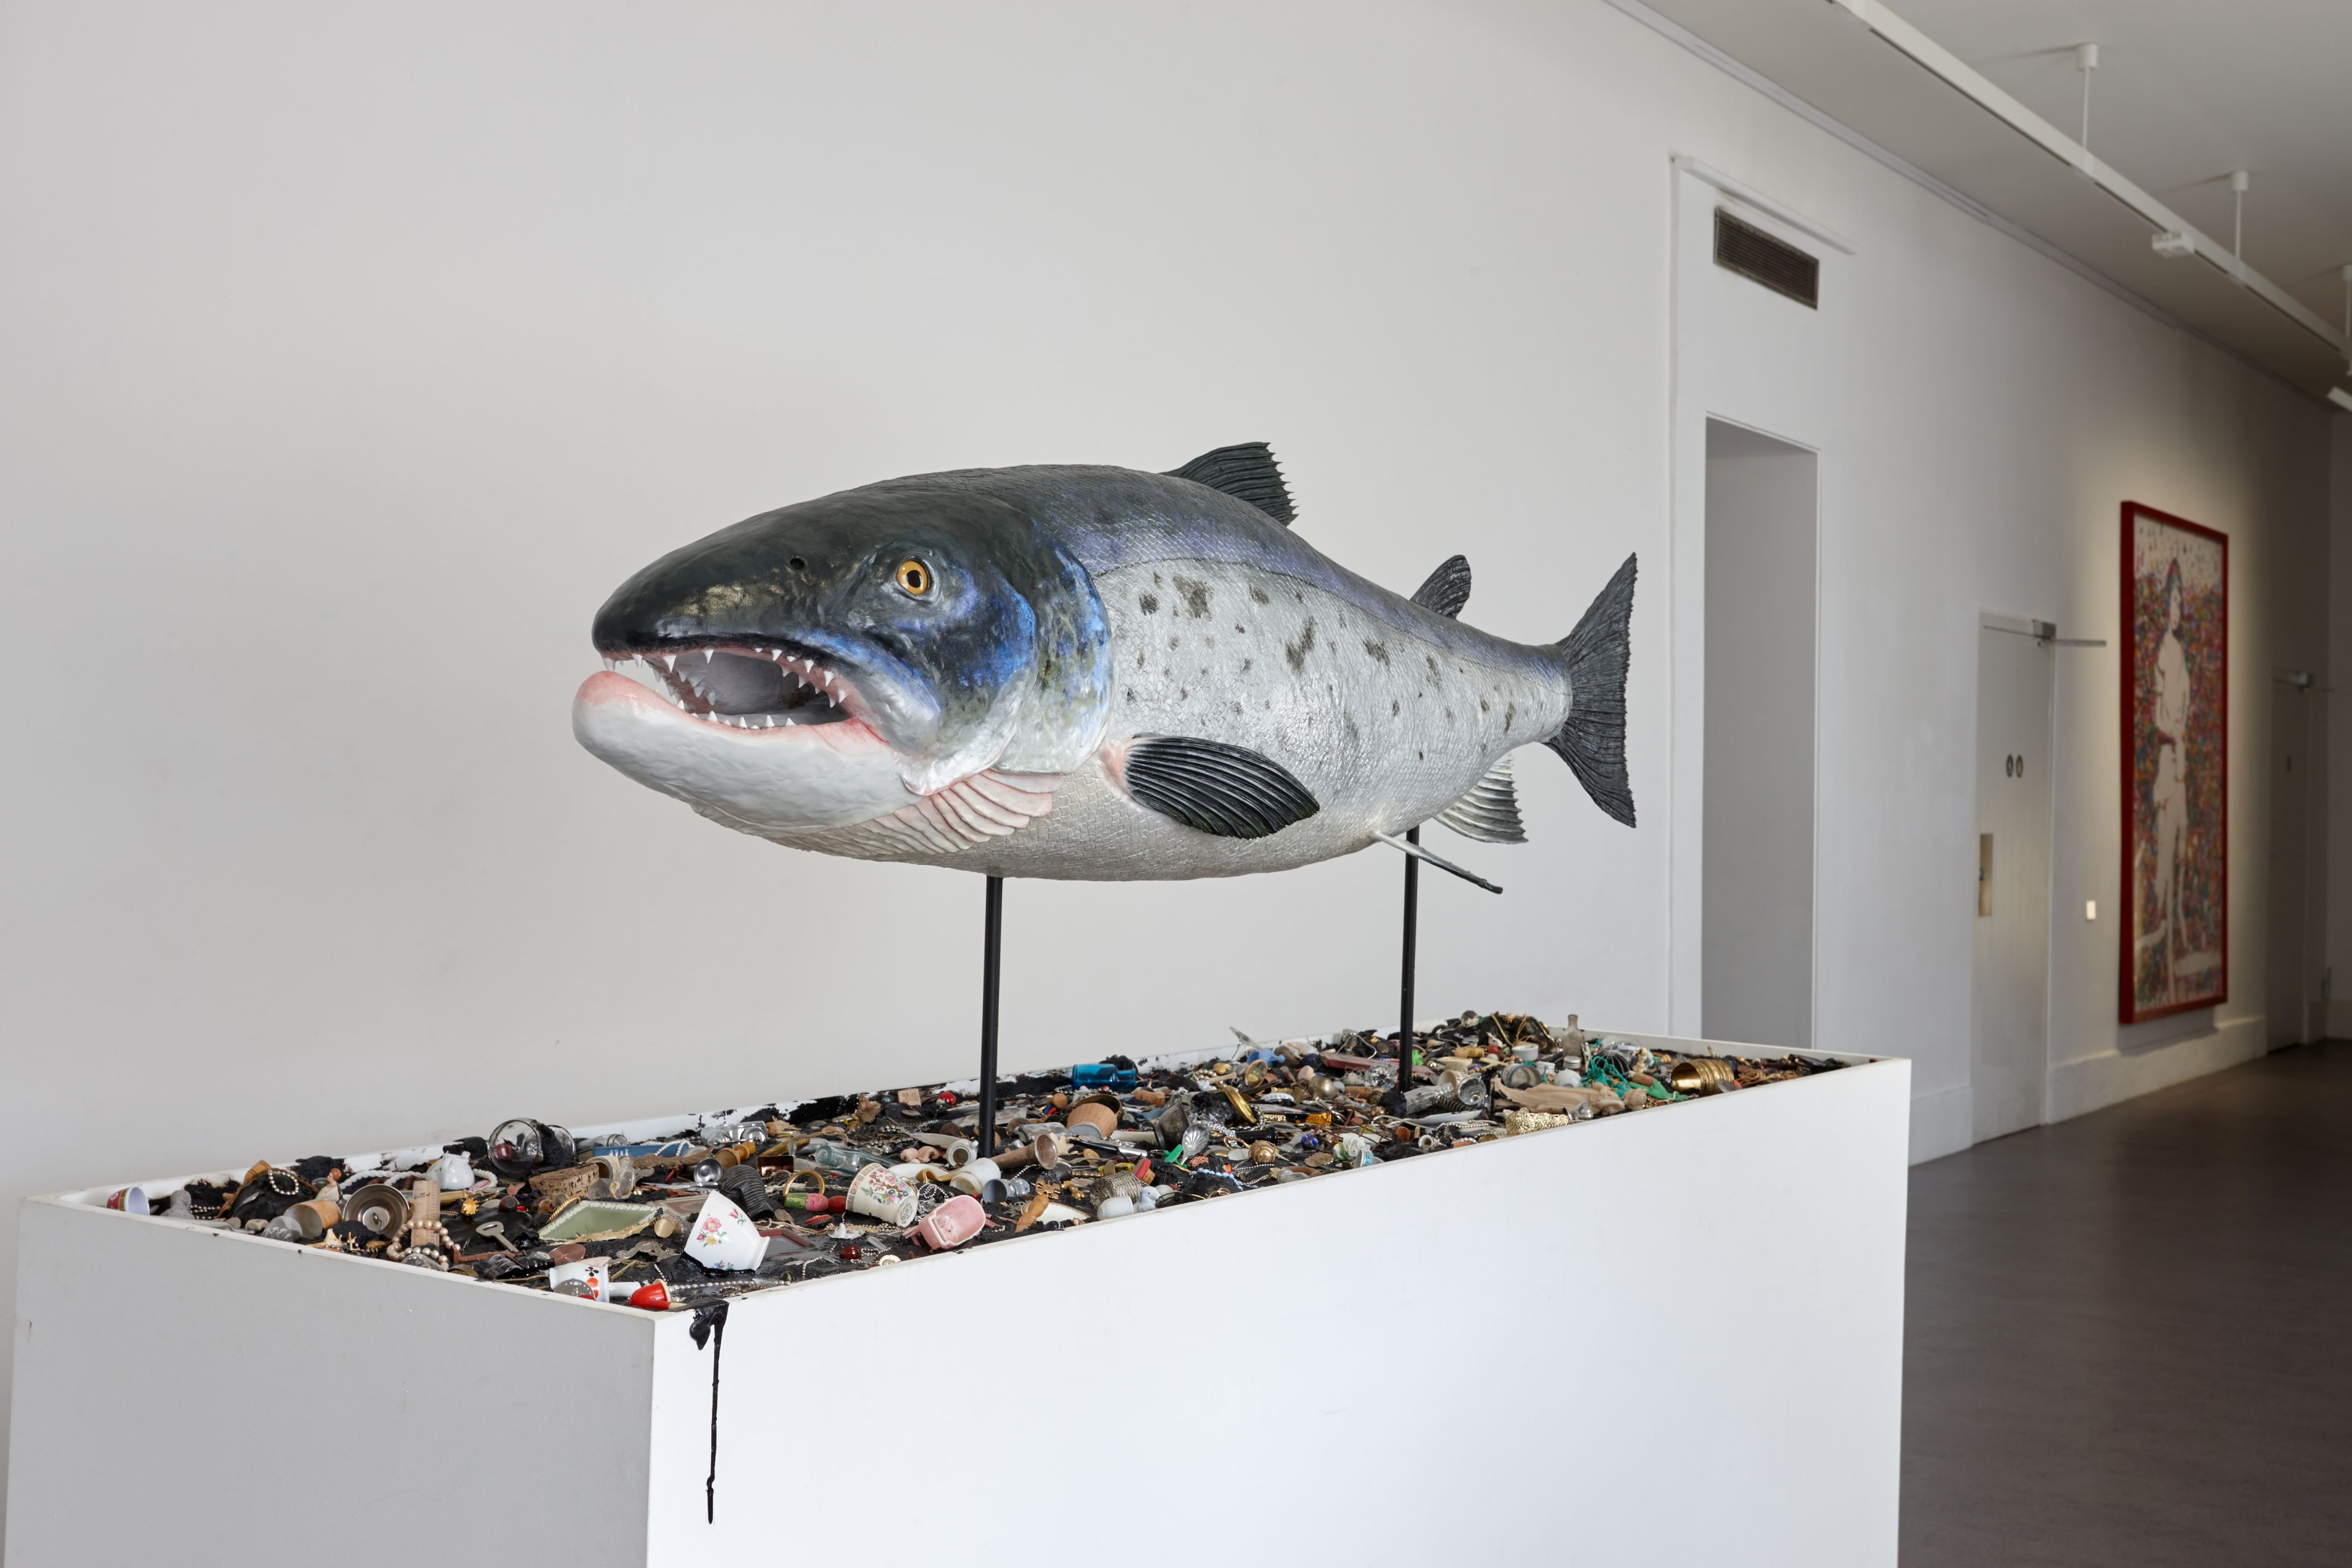 Mark Dion The Salmon of Knowledge Returns, 2015 Epoxy resin, steel, tar, wood, foam, paper, aerosol enamel, acrylic paints, adhesives, glass eyes, mixed media 196 x 300.5 x 90.5 cm, Collection Irish Museum of Modern Art, On loan from the artist, 2016. Photography courtesy of Dennis Mortell.